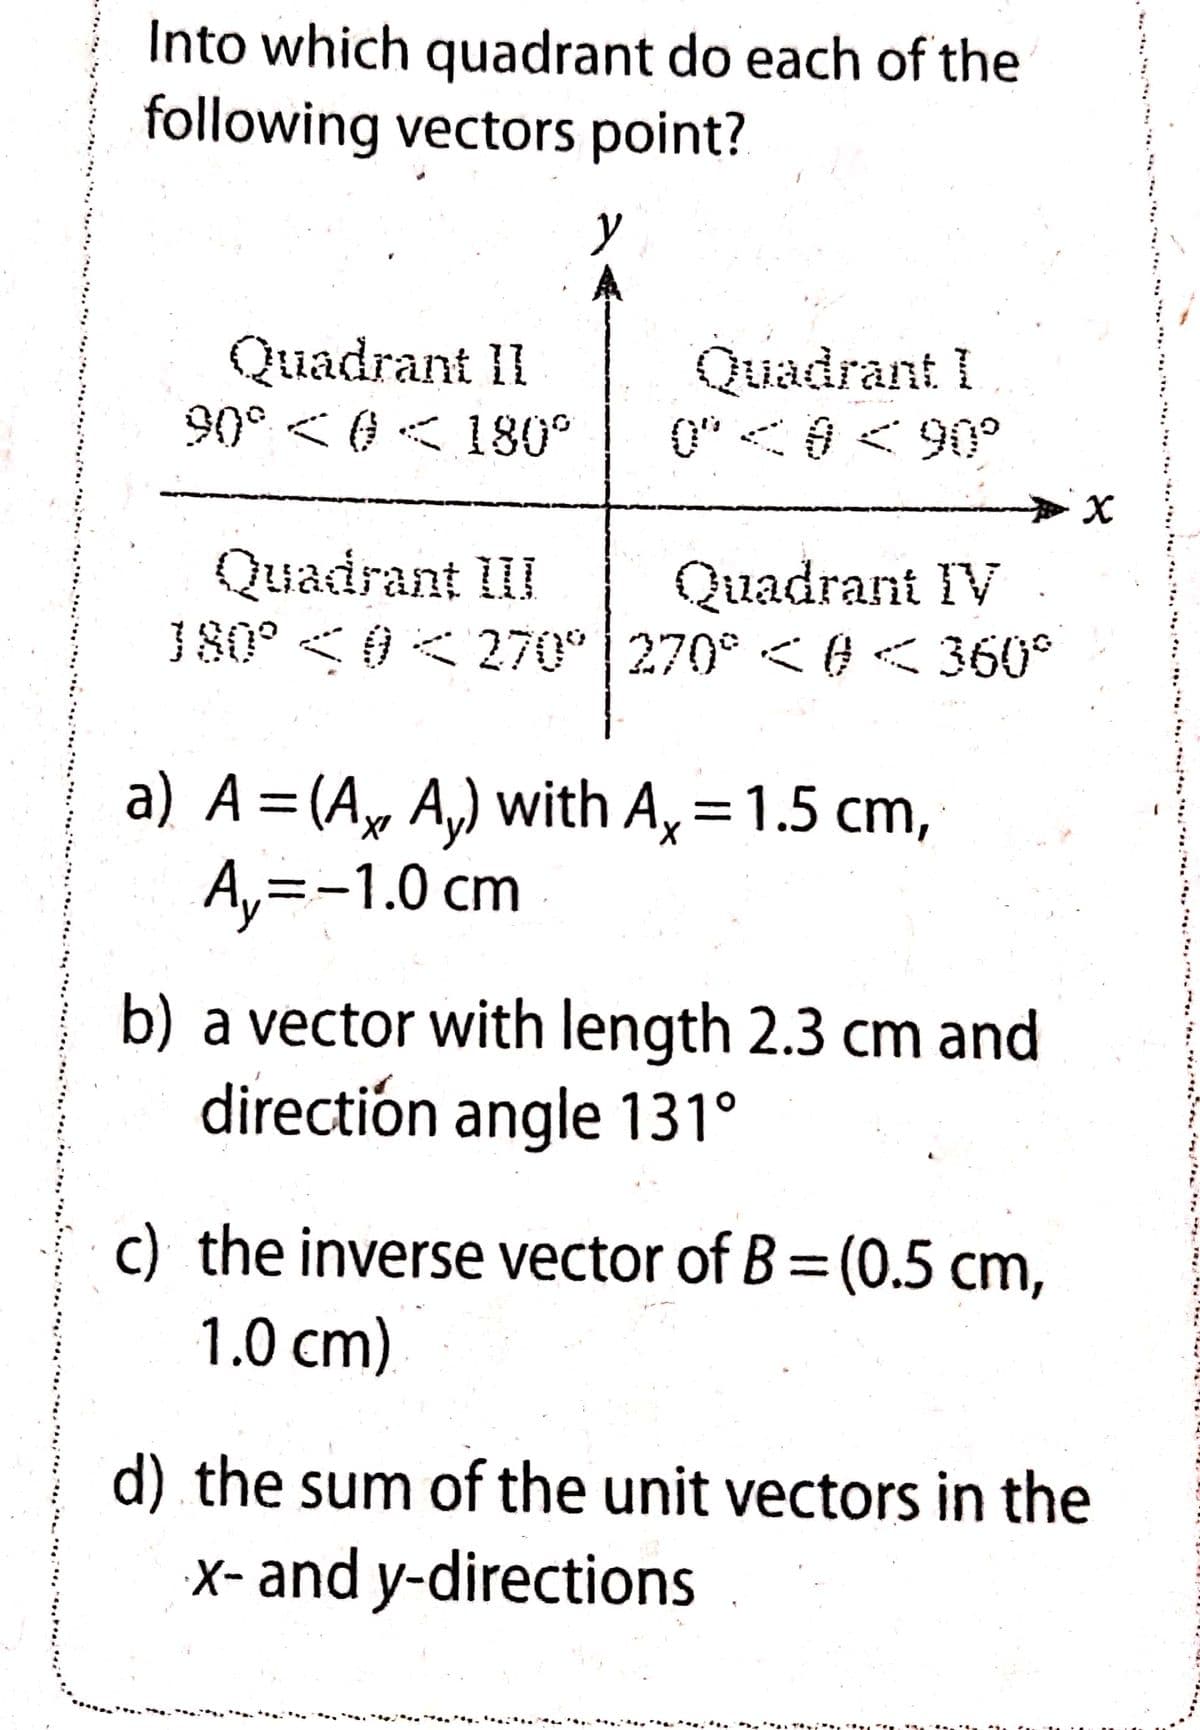 Into which quadrant do each of the
following vectors point?
y
Quadrant II
90° < 0< 180°
Quadrant I
0"<0<90°
Quadrant III
180° <0<270° 270° < 0< 360°
Quadrant IV
a) A=(A, A,) with A, =1.5 cm,
A,3-1.0cm
%3D
||
b) a vector with length 2.3 cm and
directión angle 131°
c) the inverse vector of B=(0.5 cm,
1.0 cm)
d) the sum of the unit vectors in the
X- and y-directions
*...
. ..
* * ,...
